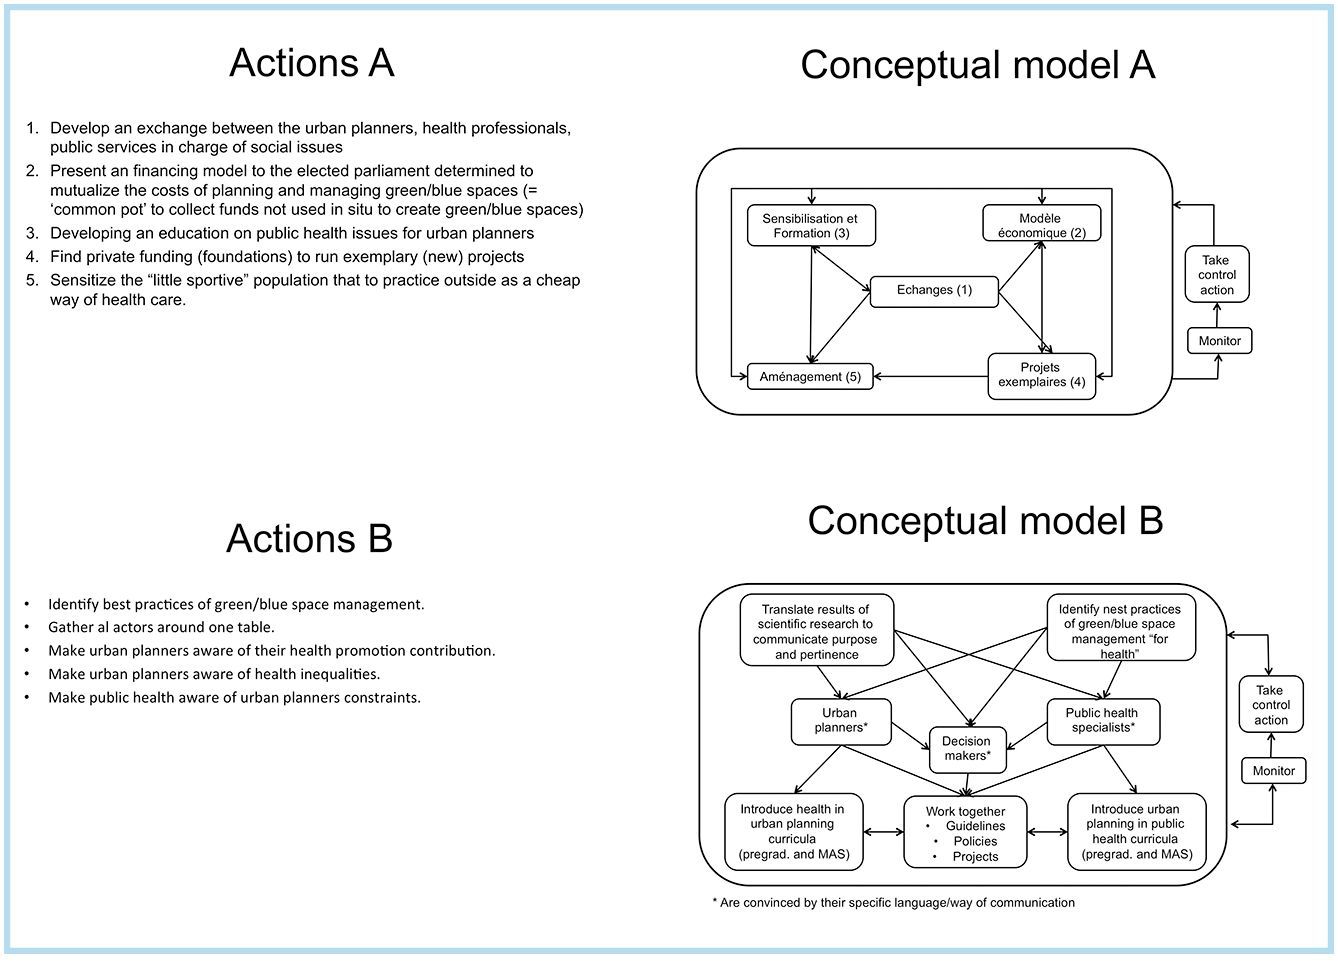 Figure 3: Two conceptual models the board members provided. Model A addresses root definition A and Model B root definition B.